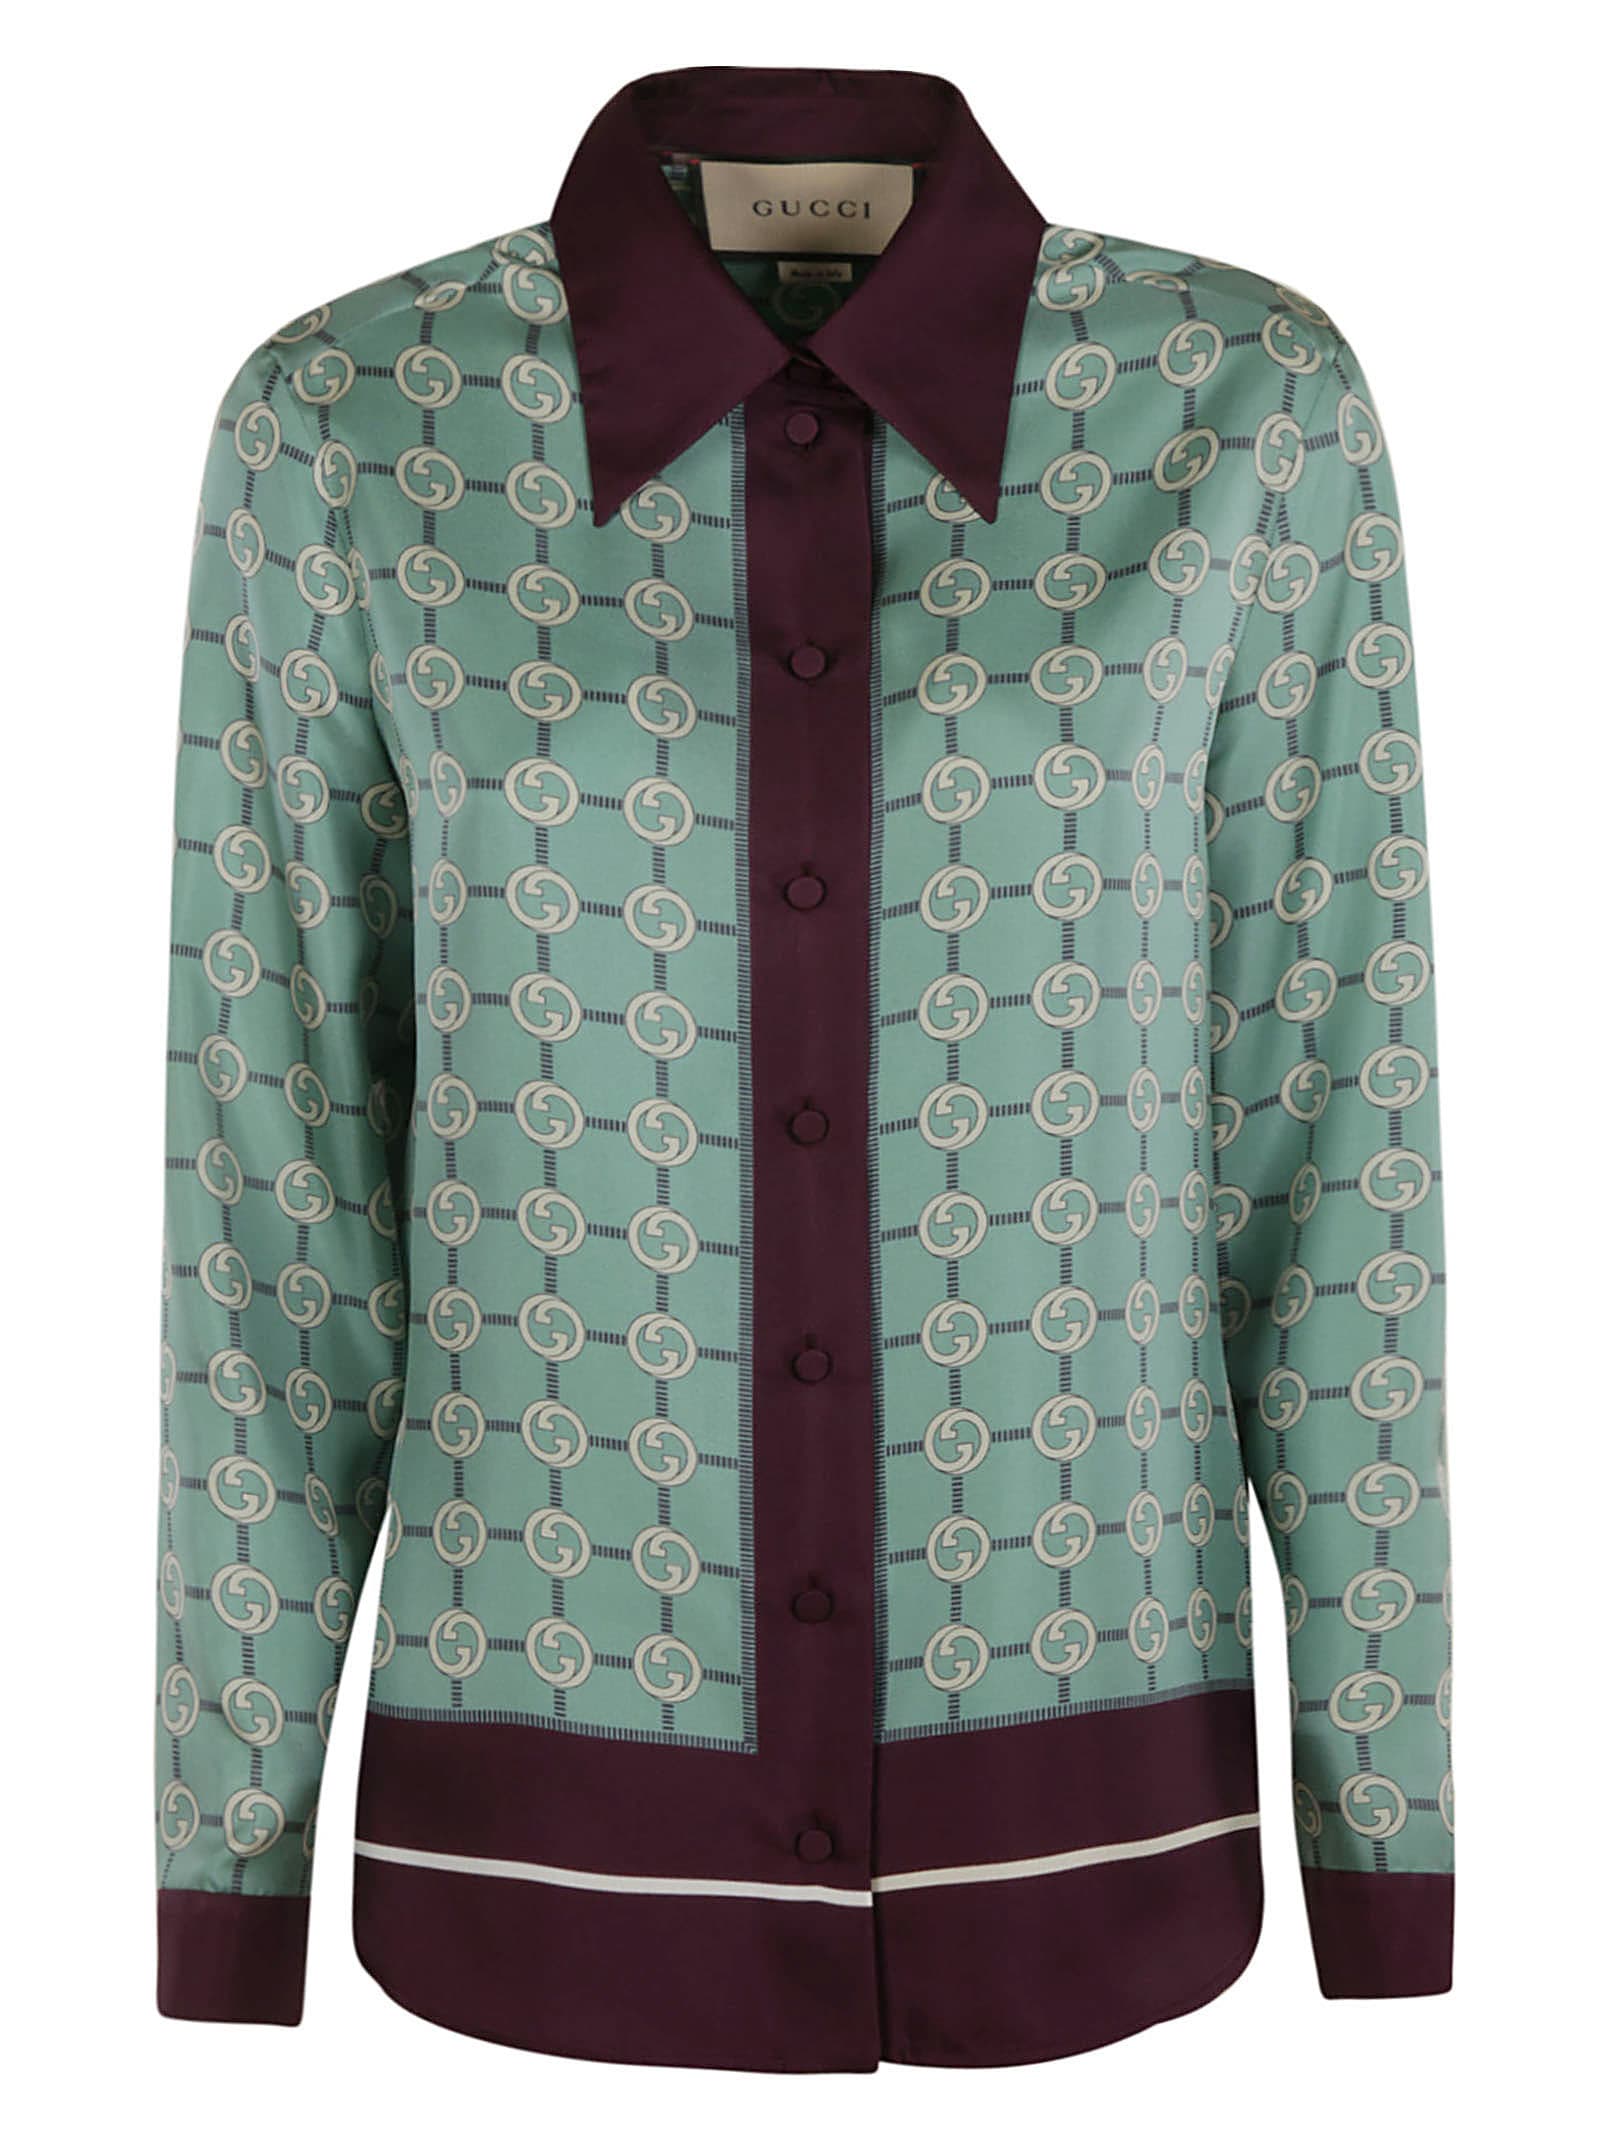 Gucci All-over Printed Shirt